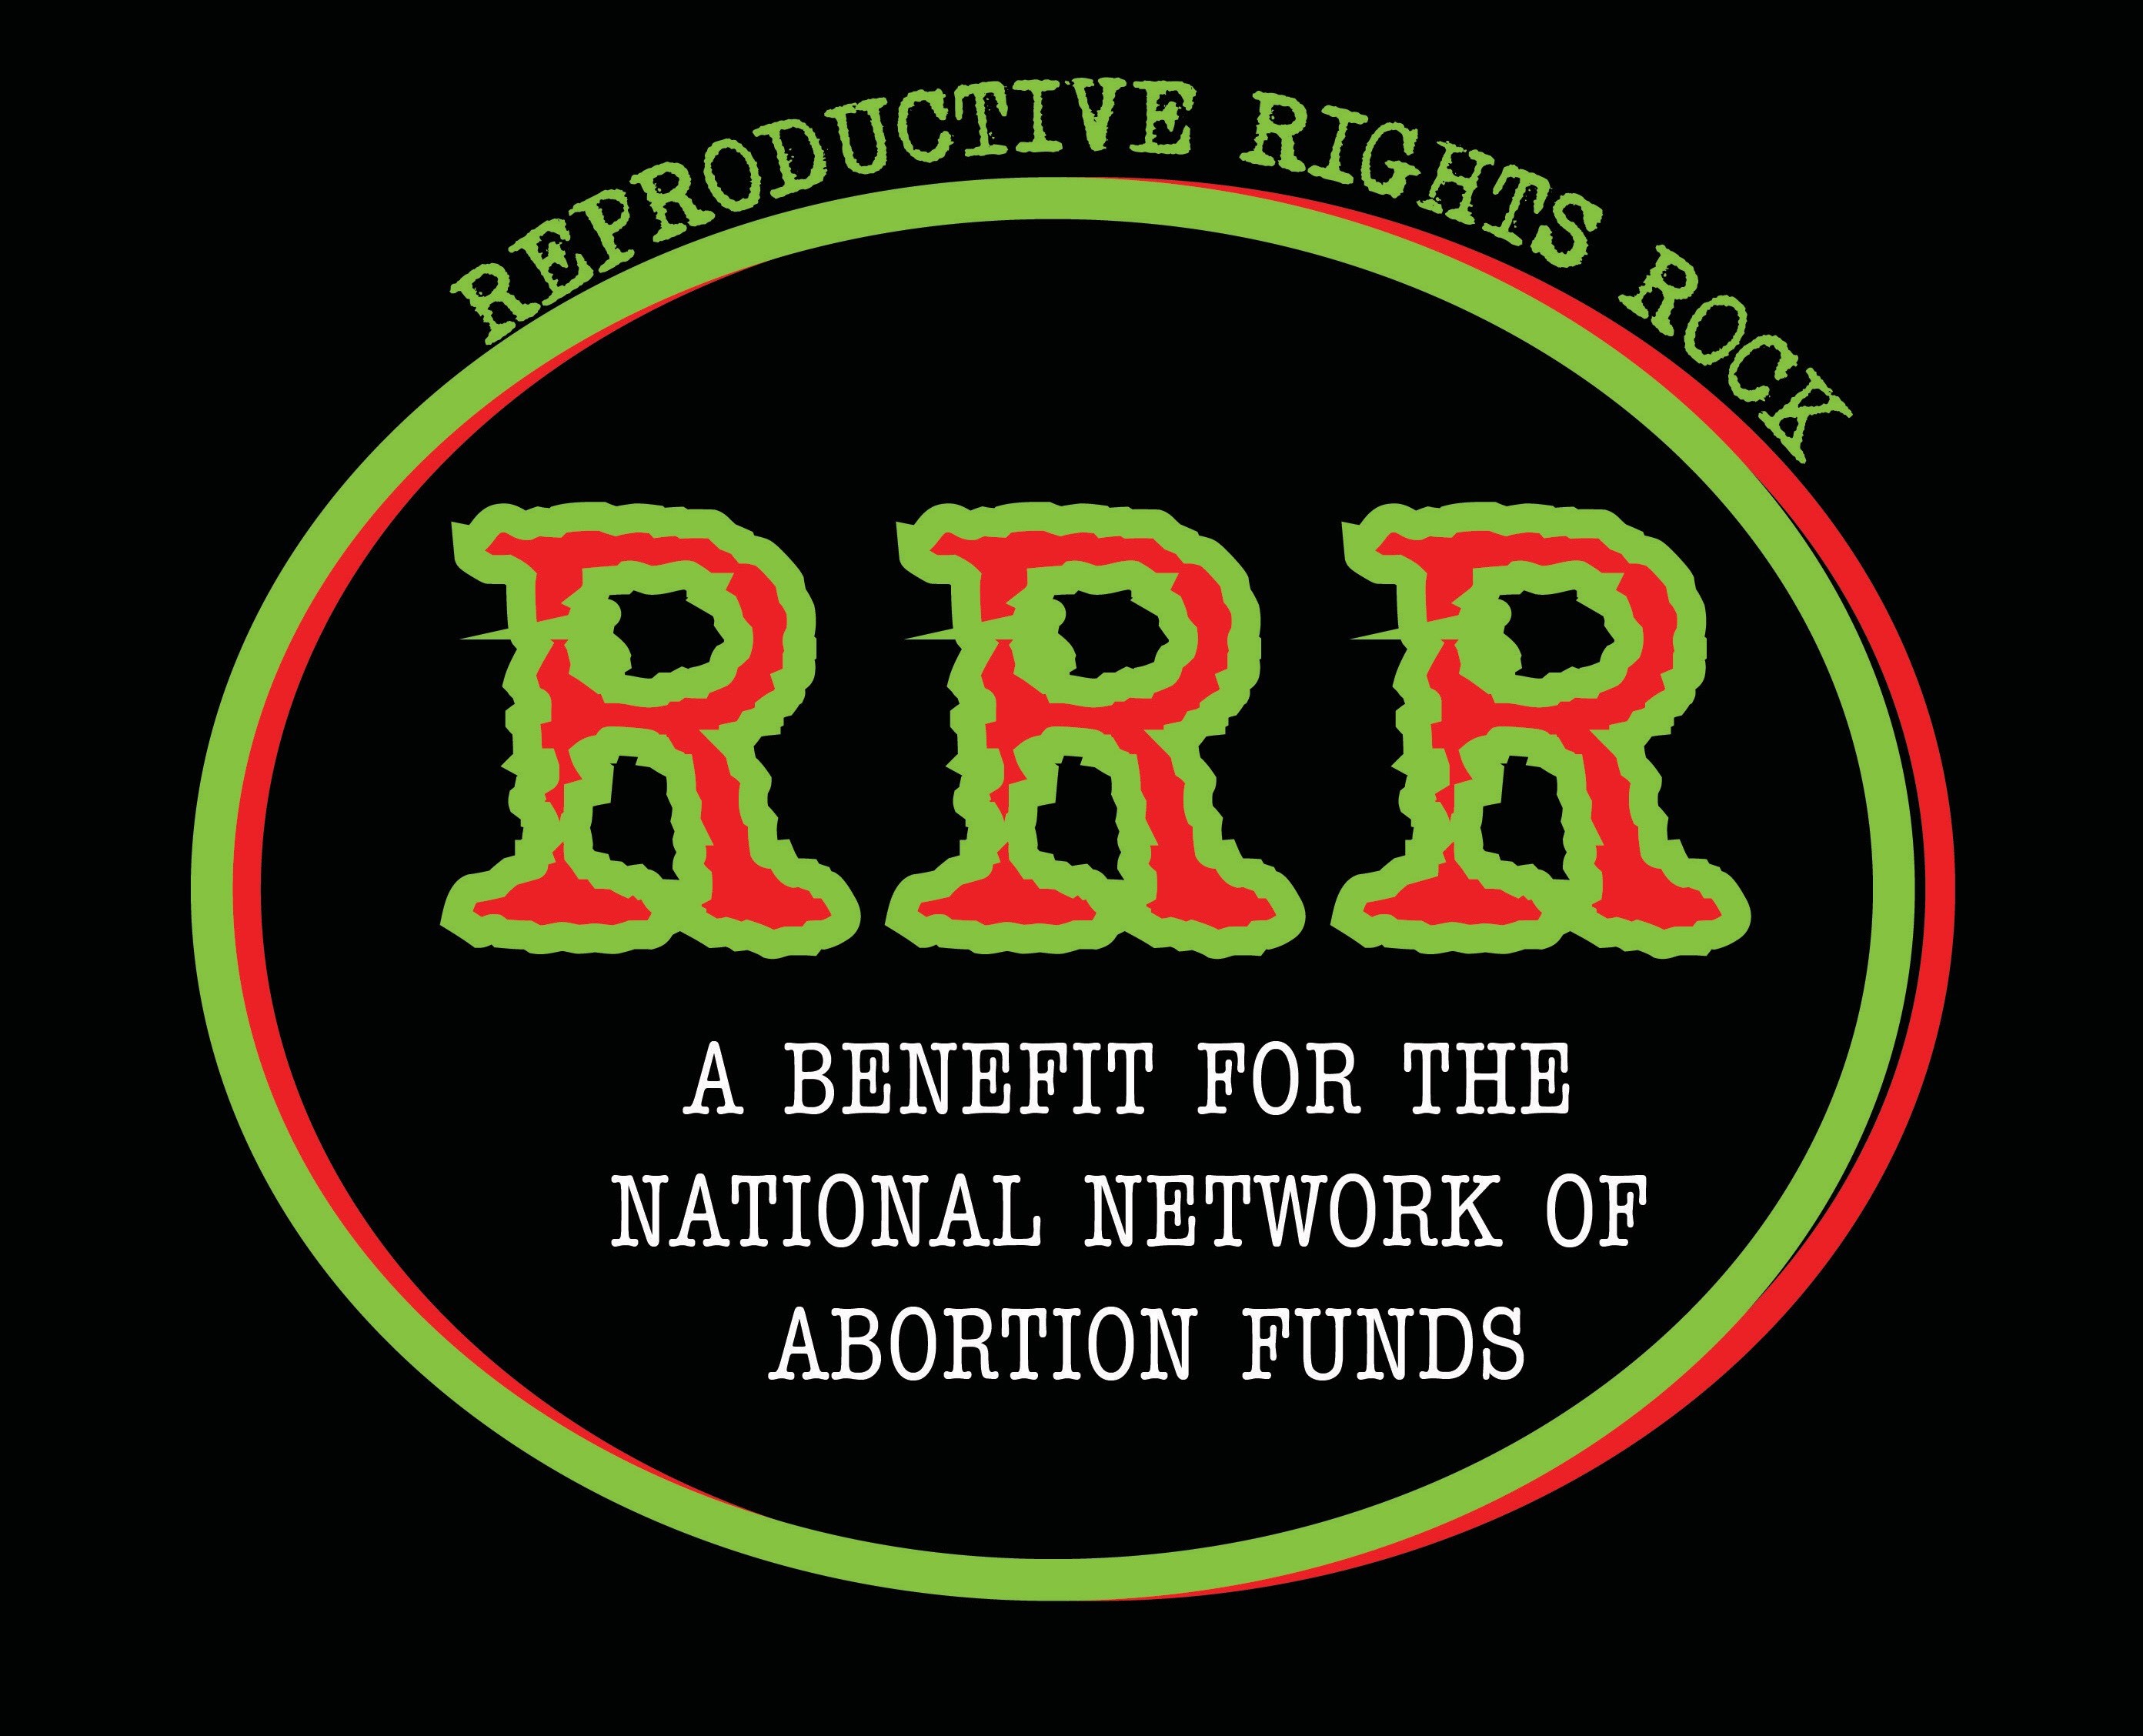 Reproductive Rights Rock Series